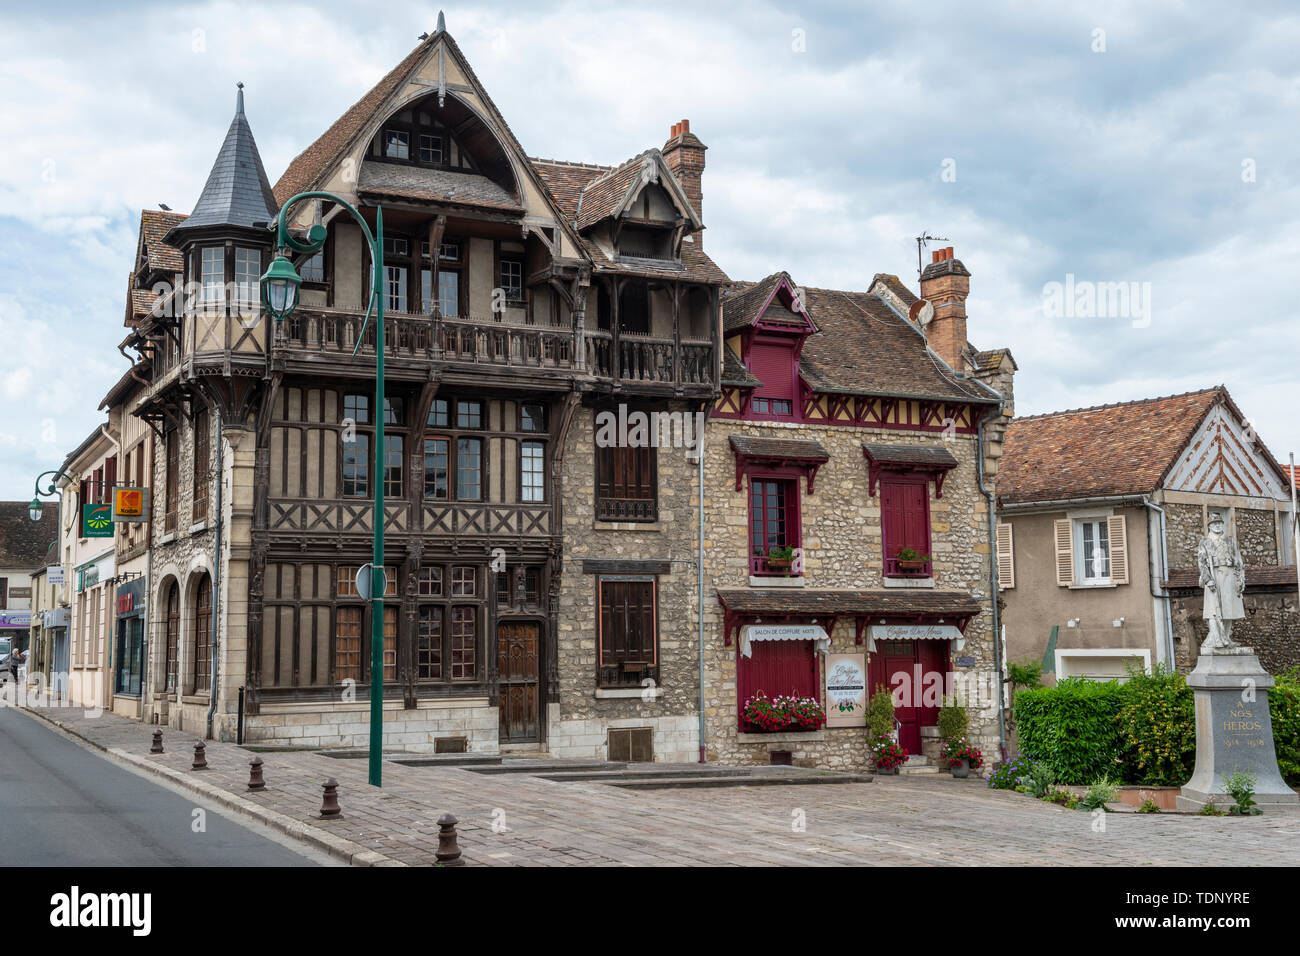 Historic building on Rue Grande with war memorial on right in Moret-sur-Loing, Seine-et-Marne, Île-de-France region of north-central France Stock Photo